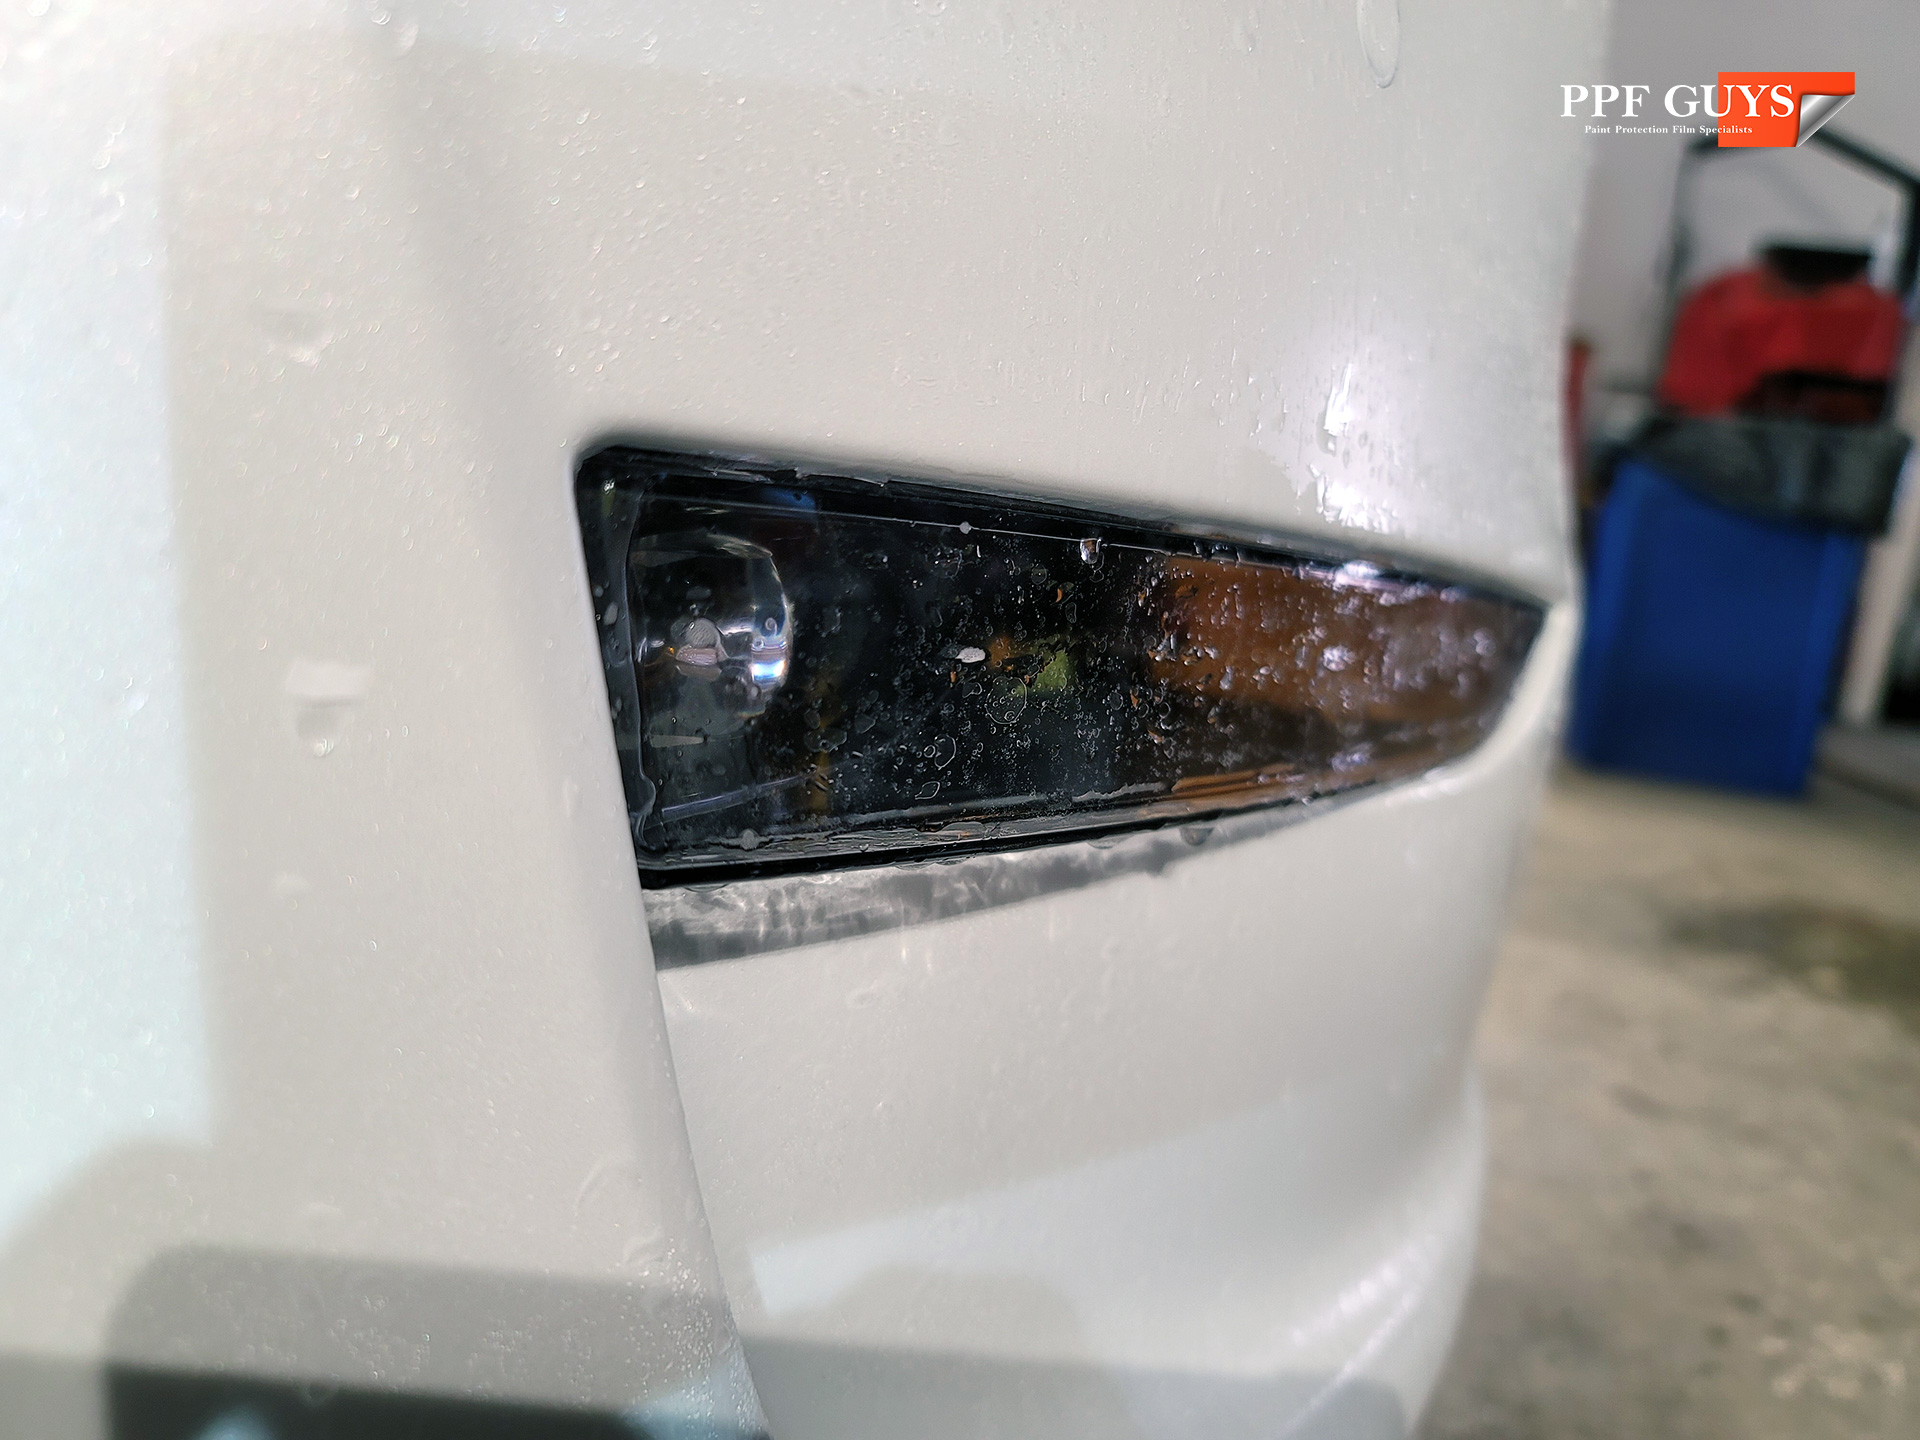 PPF Guys Model Y White Xpel Stealth, ceramic, painted emblems (19).jpg